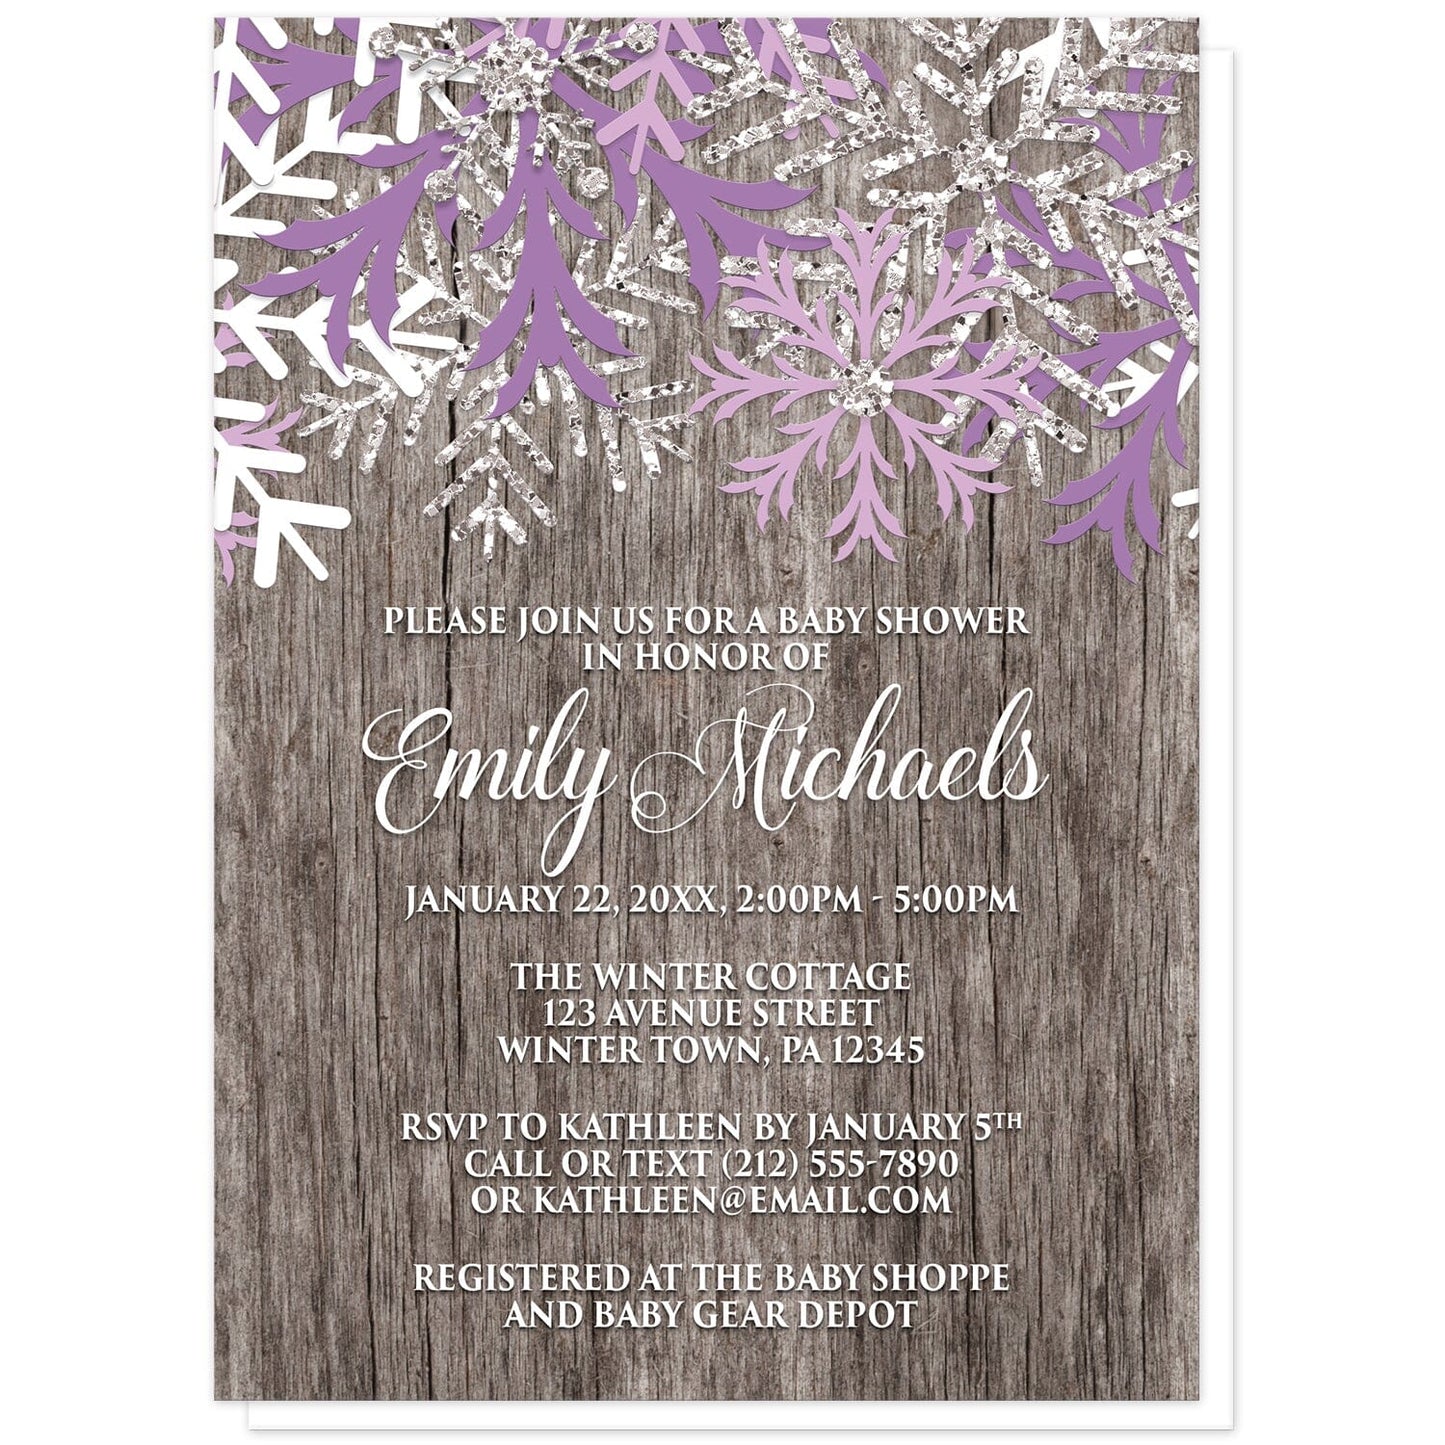 Rustic Winter Wood Purple Snowflake Baby Shower Invitations at Artistically Invited. Country-inspired rustic winter wood purple snowflake baby shower invitations designed with purple, light purple, white, and silver-colored glitter-illustrated snowflakes along the top over a rustic wood pattern illustration. Your personalized baby shower celebration details are custom printed in white over the wood background below the snowflakes.